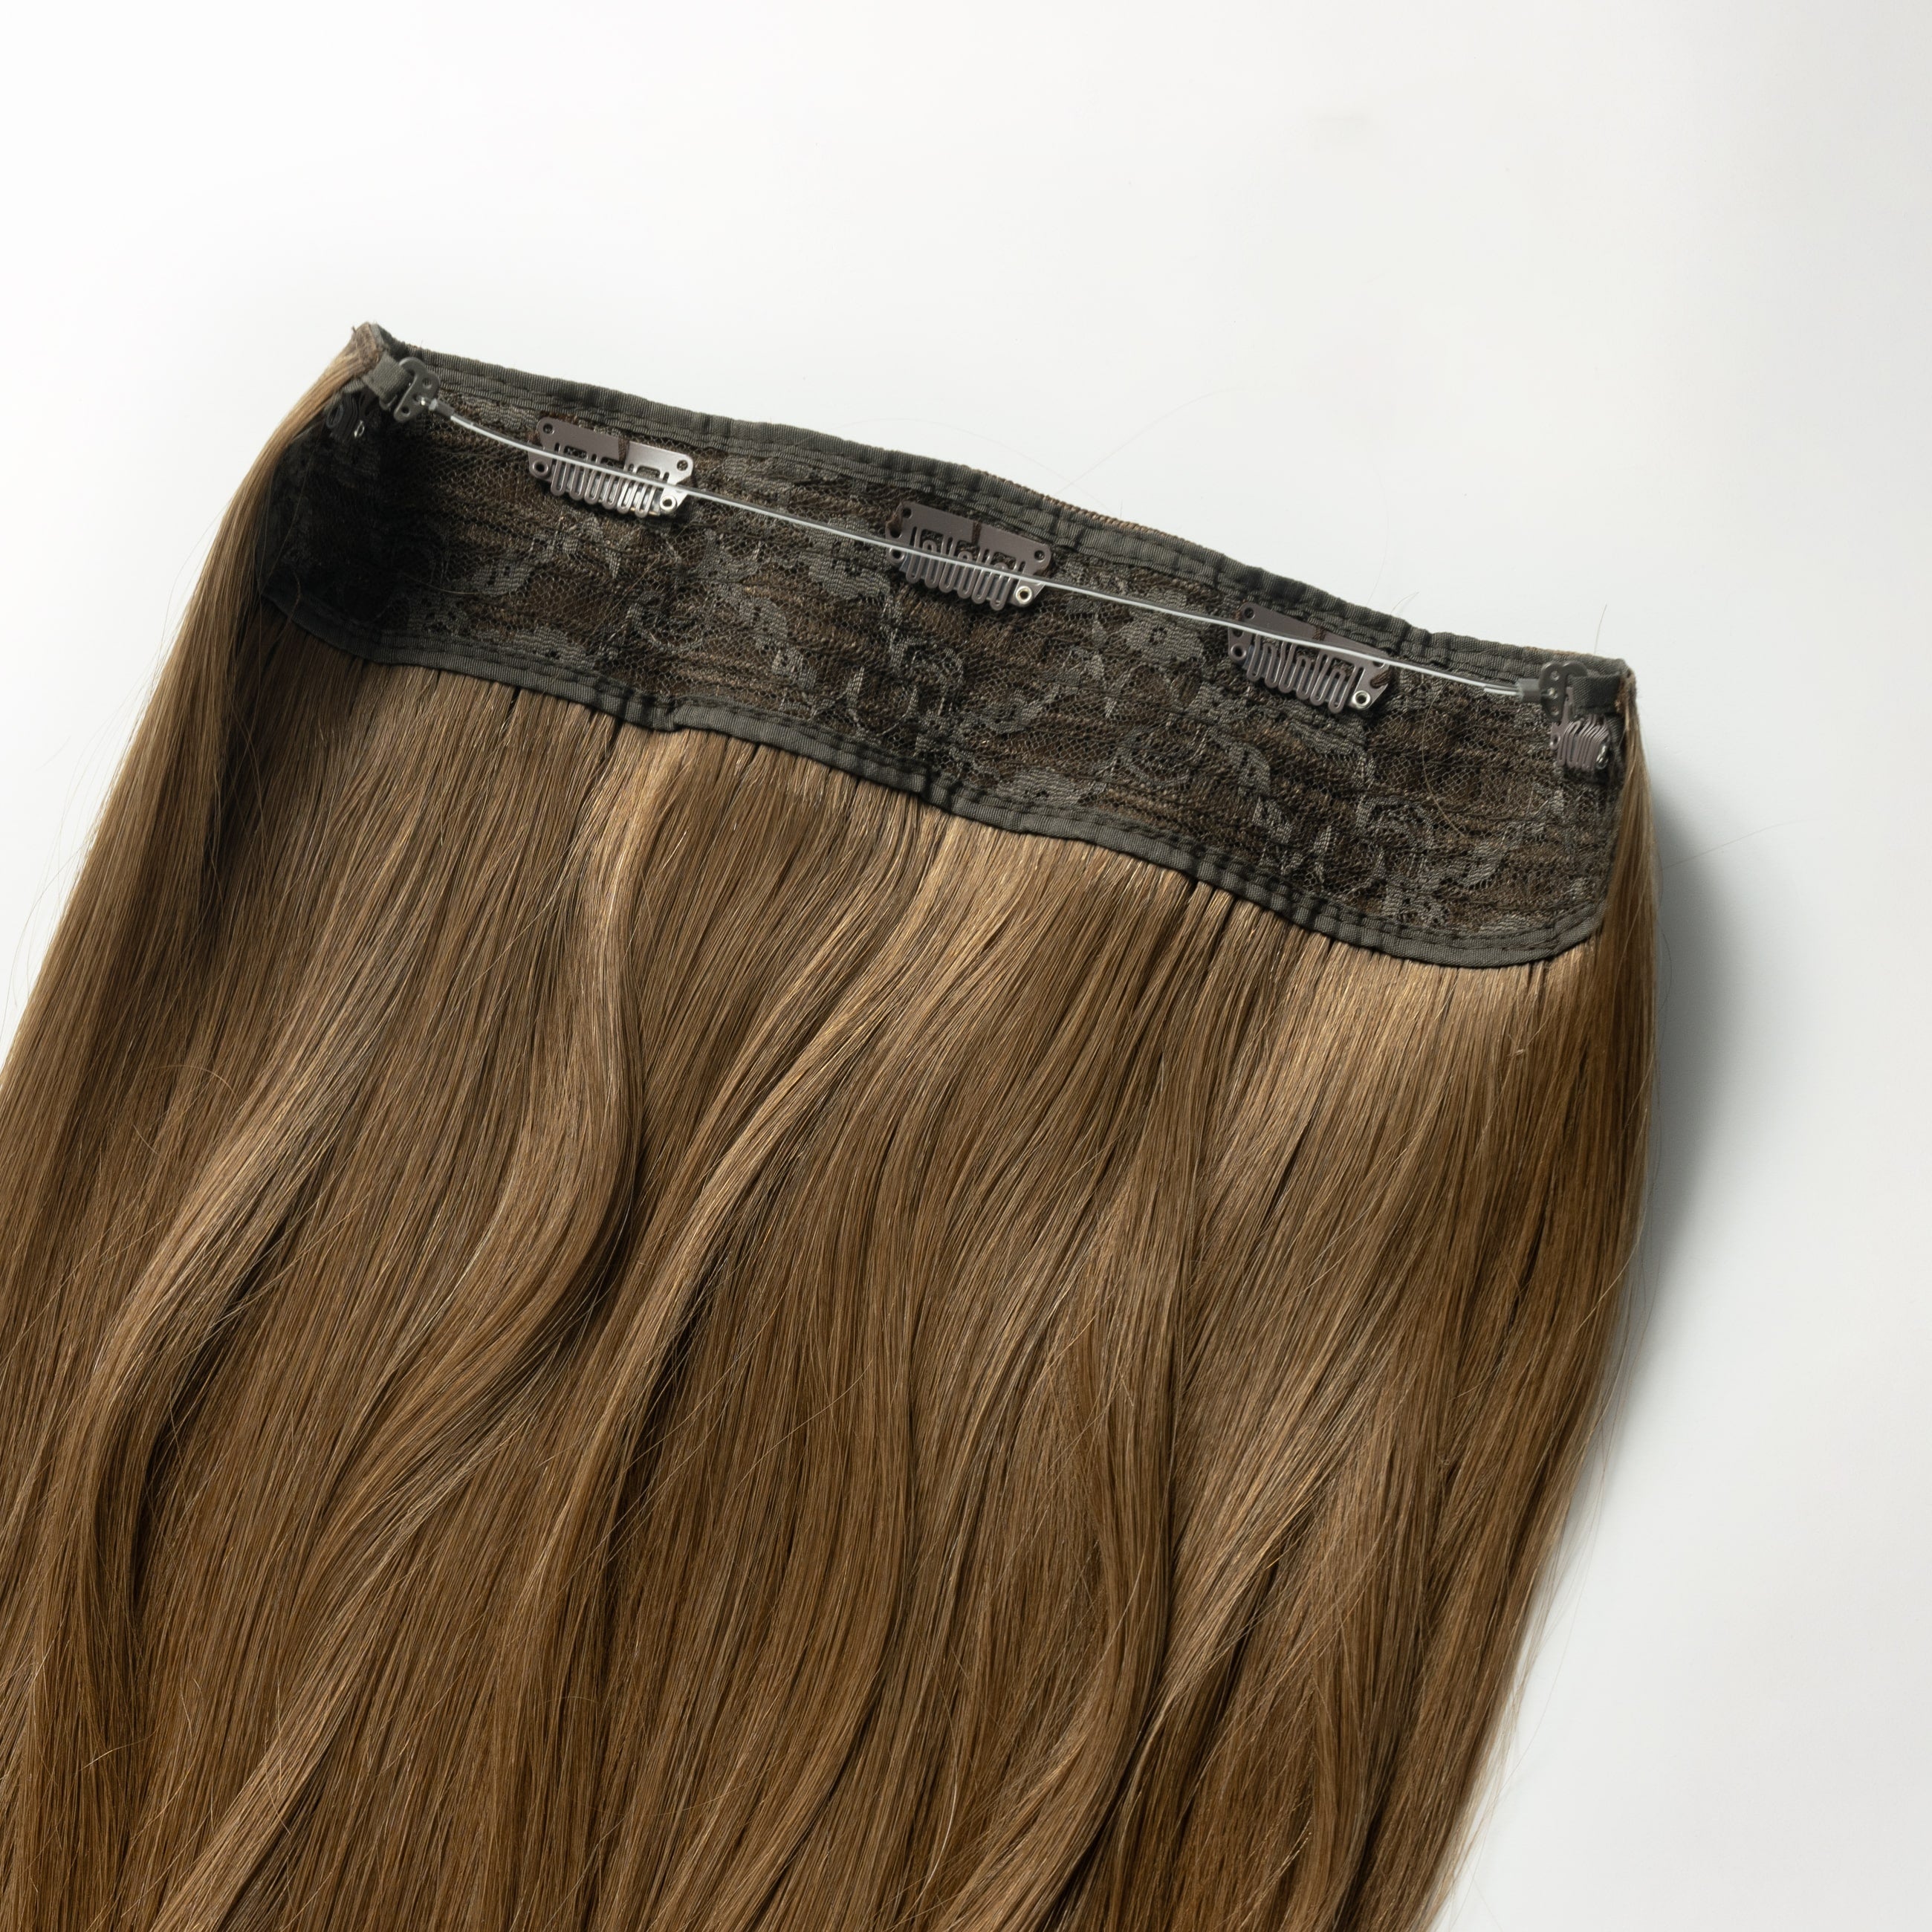 Halo extensions - Natural Brown 3